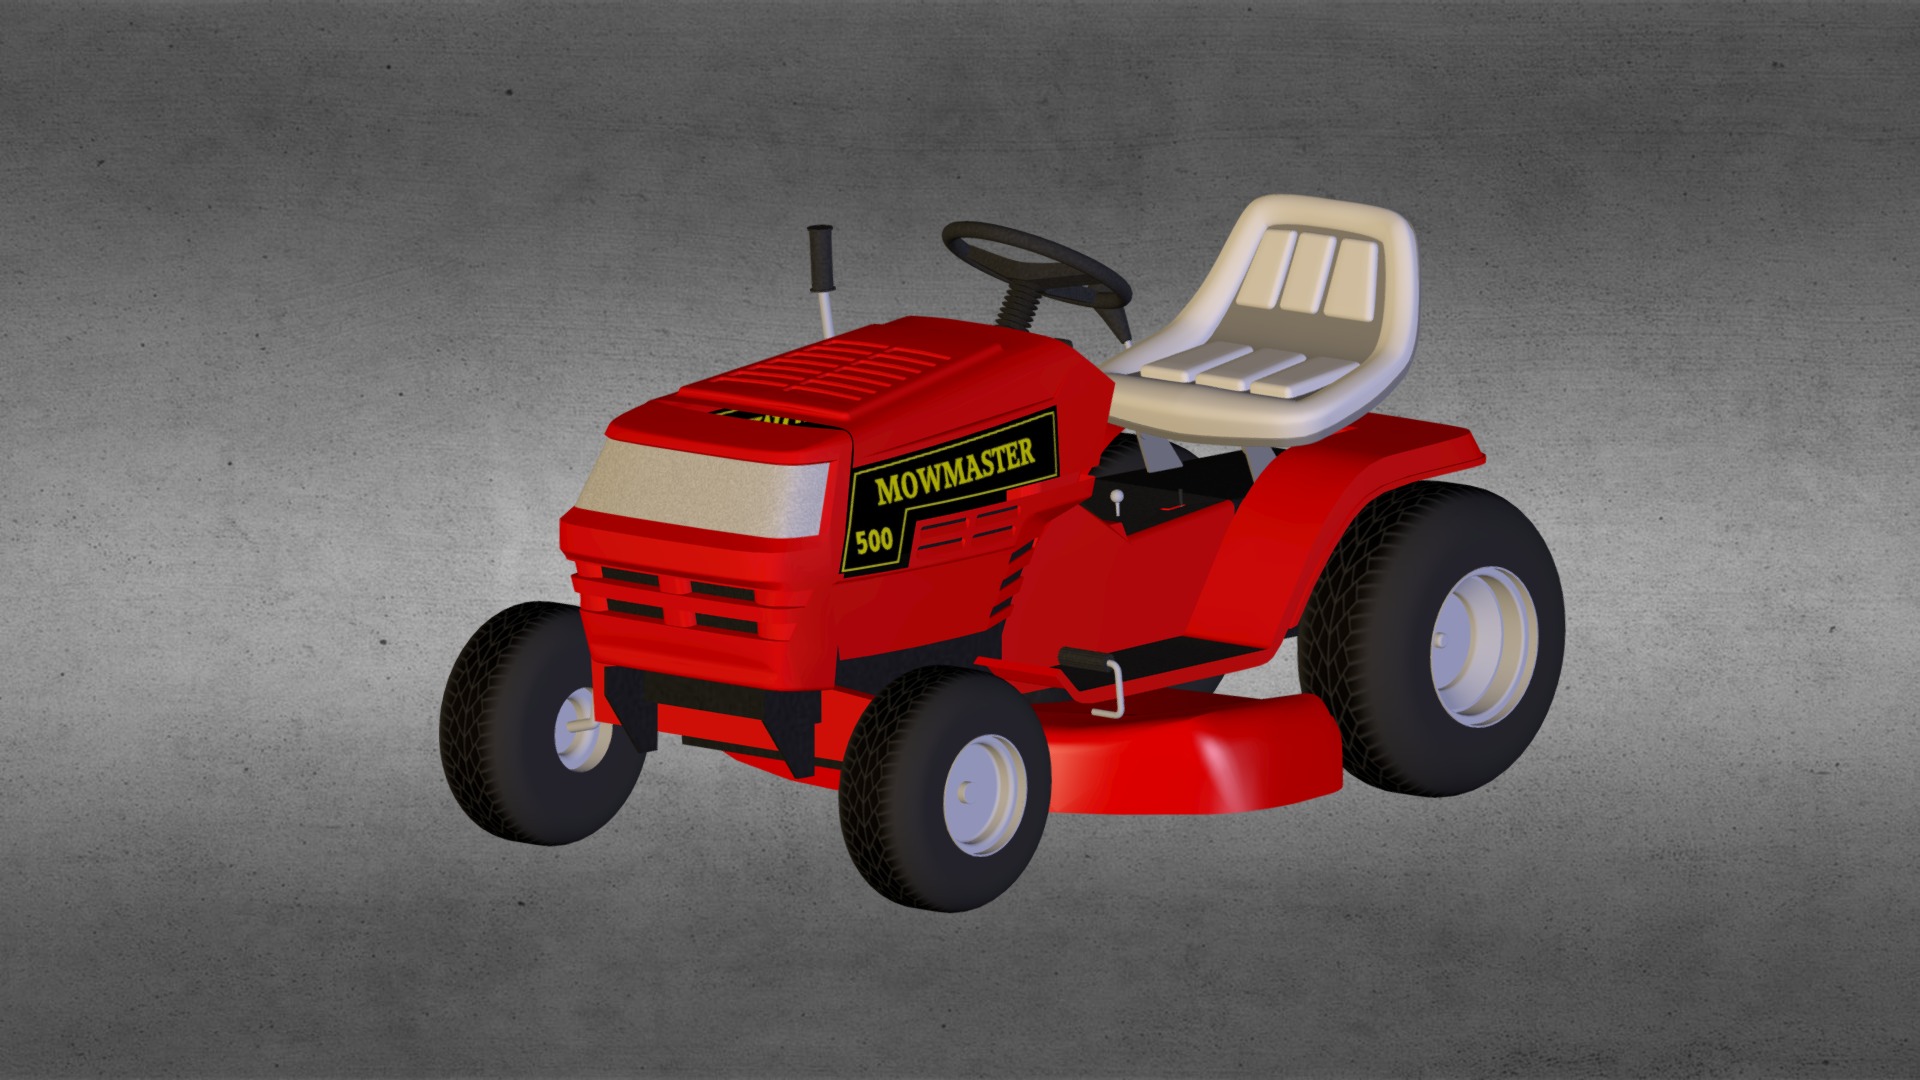 3D model Ride On Mower - This is a 3D model of the Ride On Mower. The 3D model is about a red and white toy car.